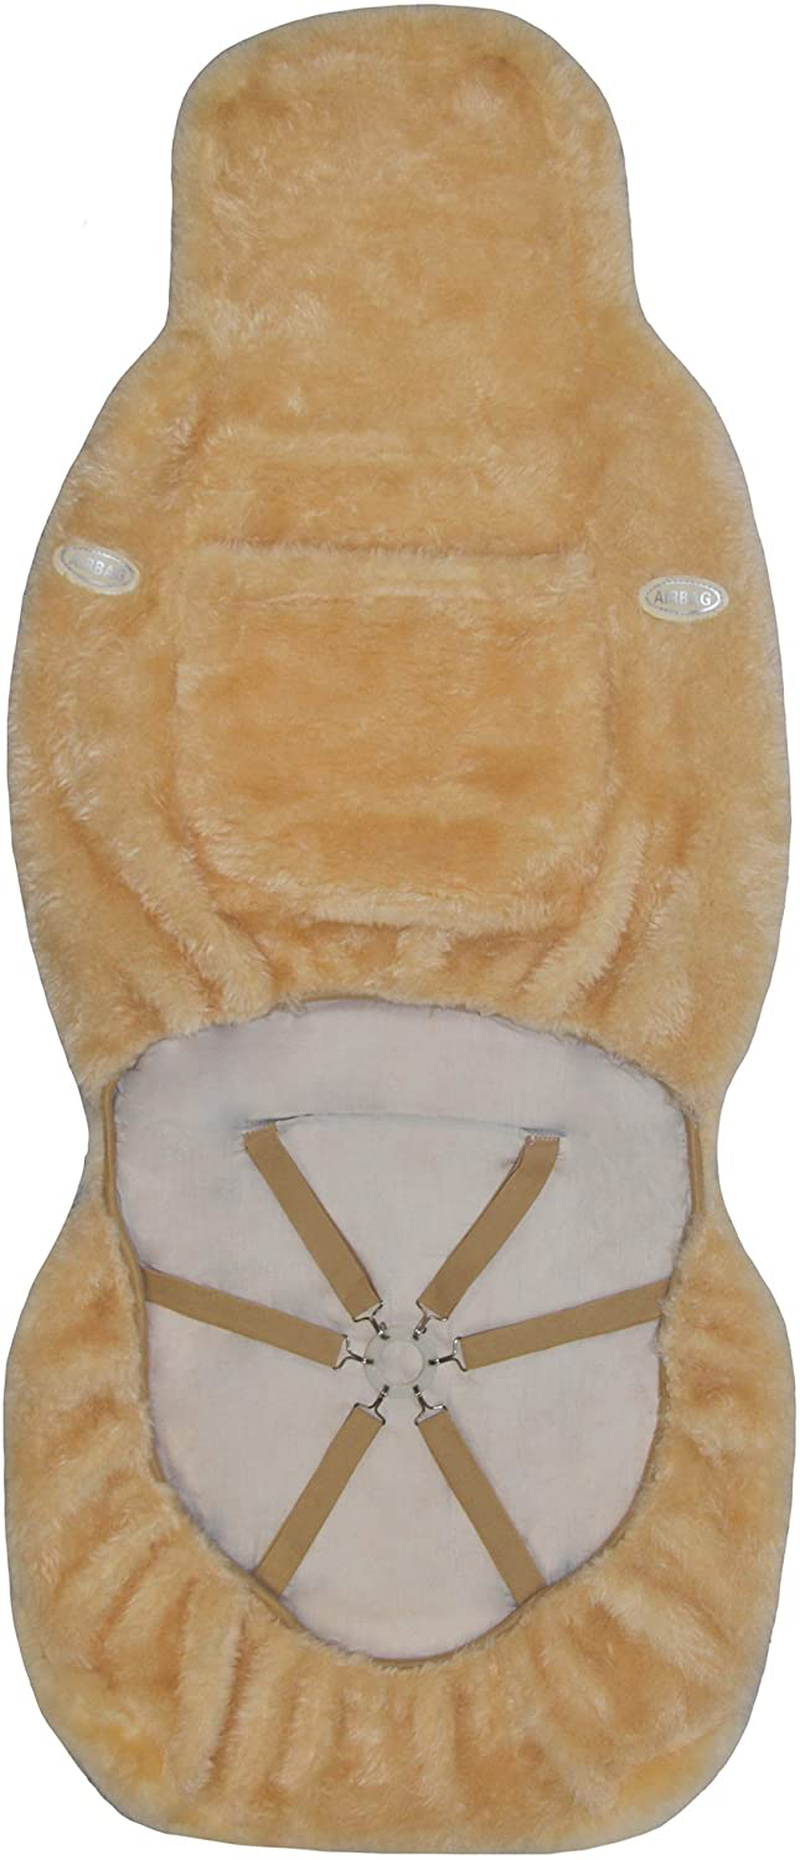 Eurow Sheepskin Seat Cover, 56 by 23 Inches, Champagne Vehicles & Parts > Vehicle Parts & Accessories > Motor Vehicle Parts > Motor Vehicle Seating ‎Eurow & O'Reilly Corp.   